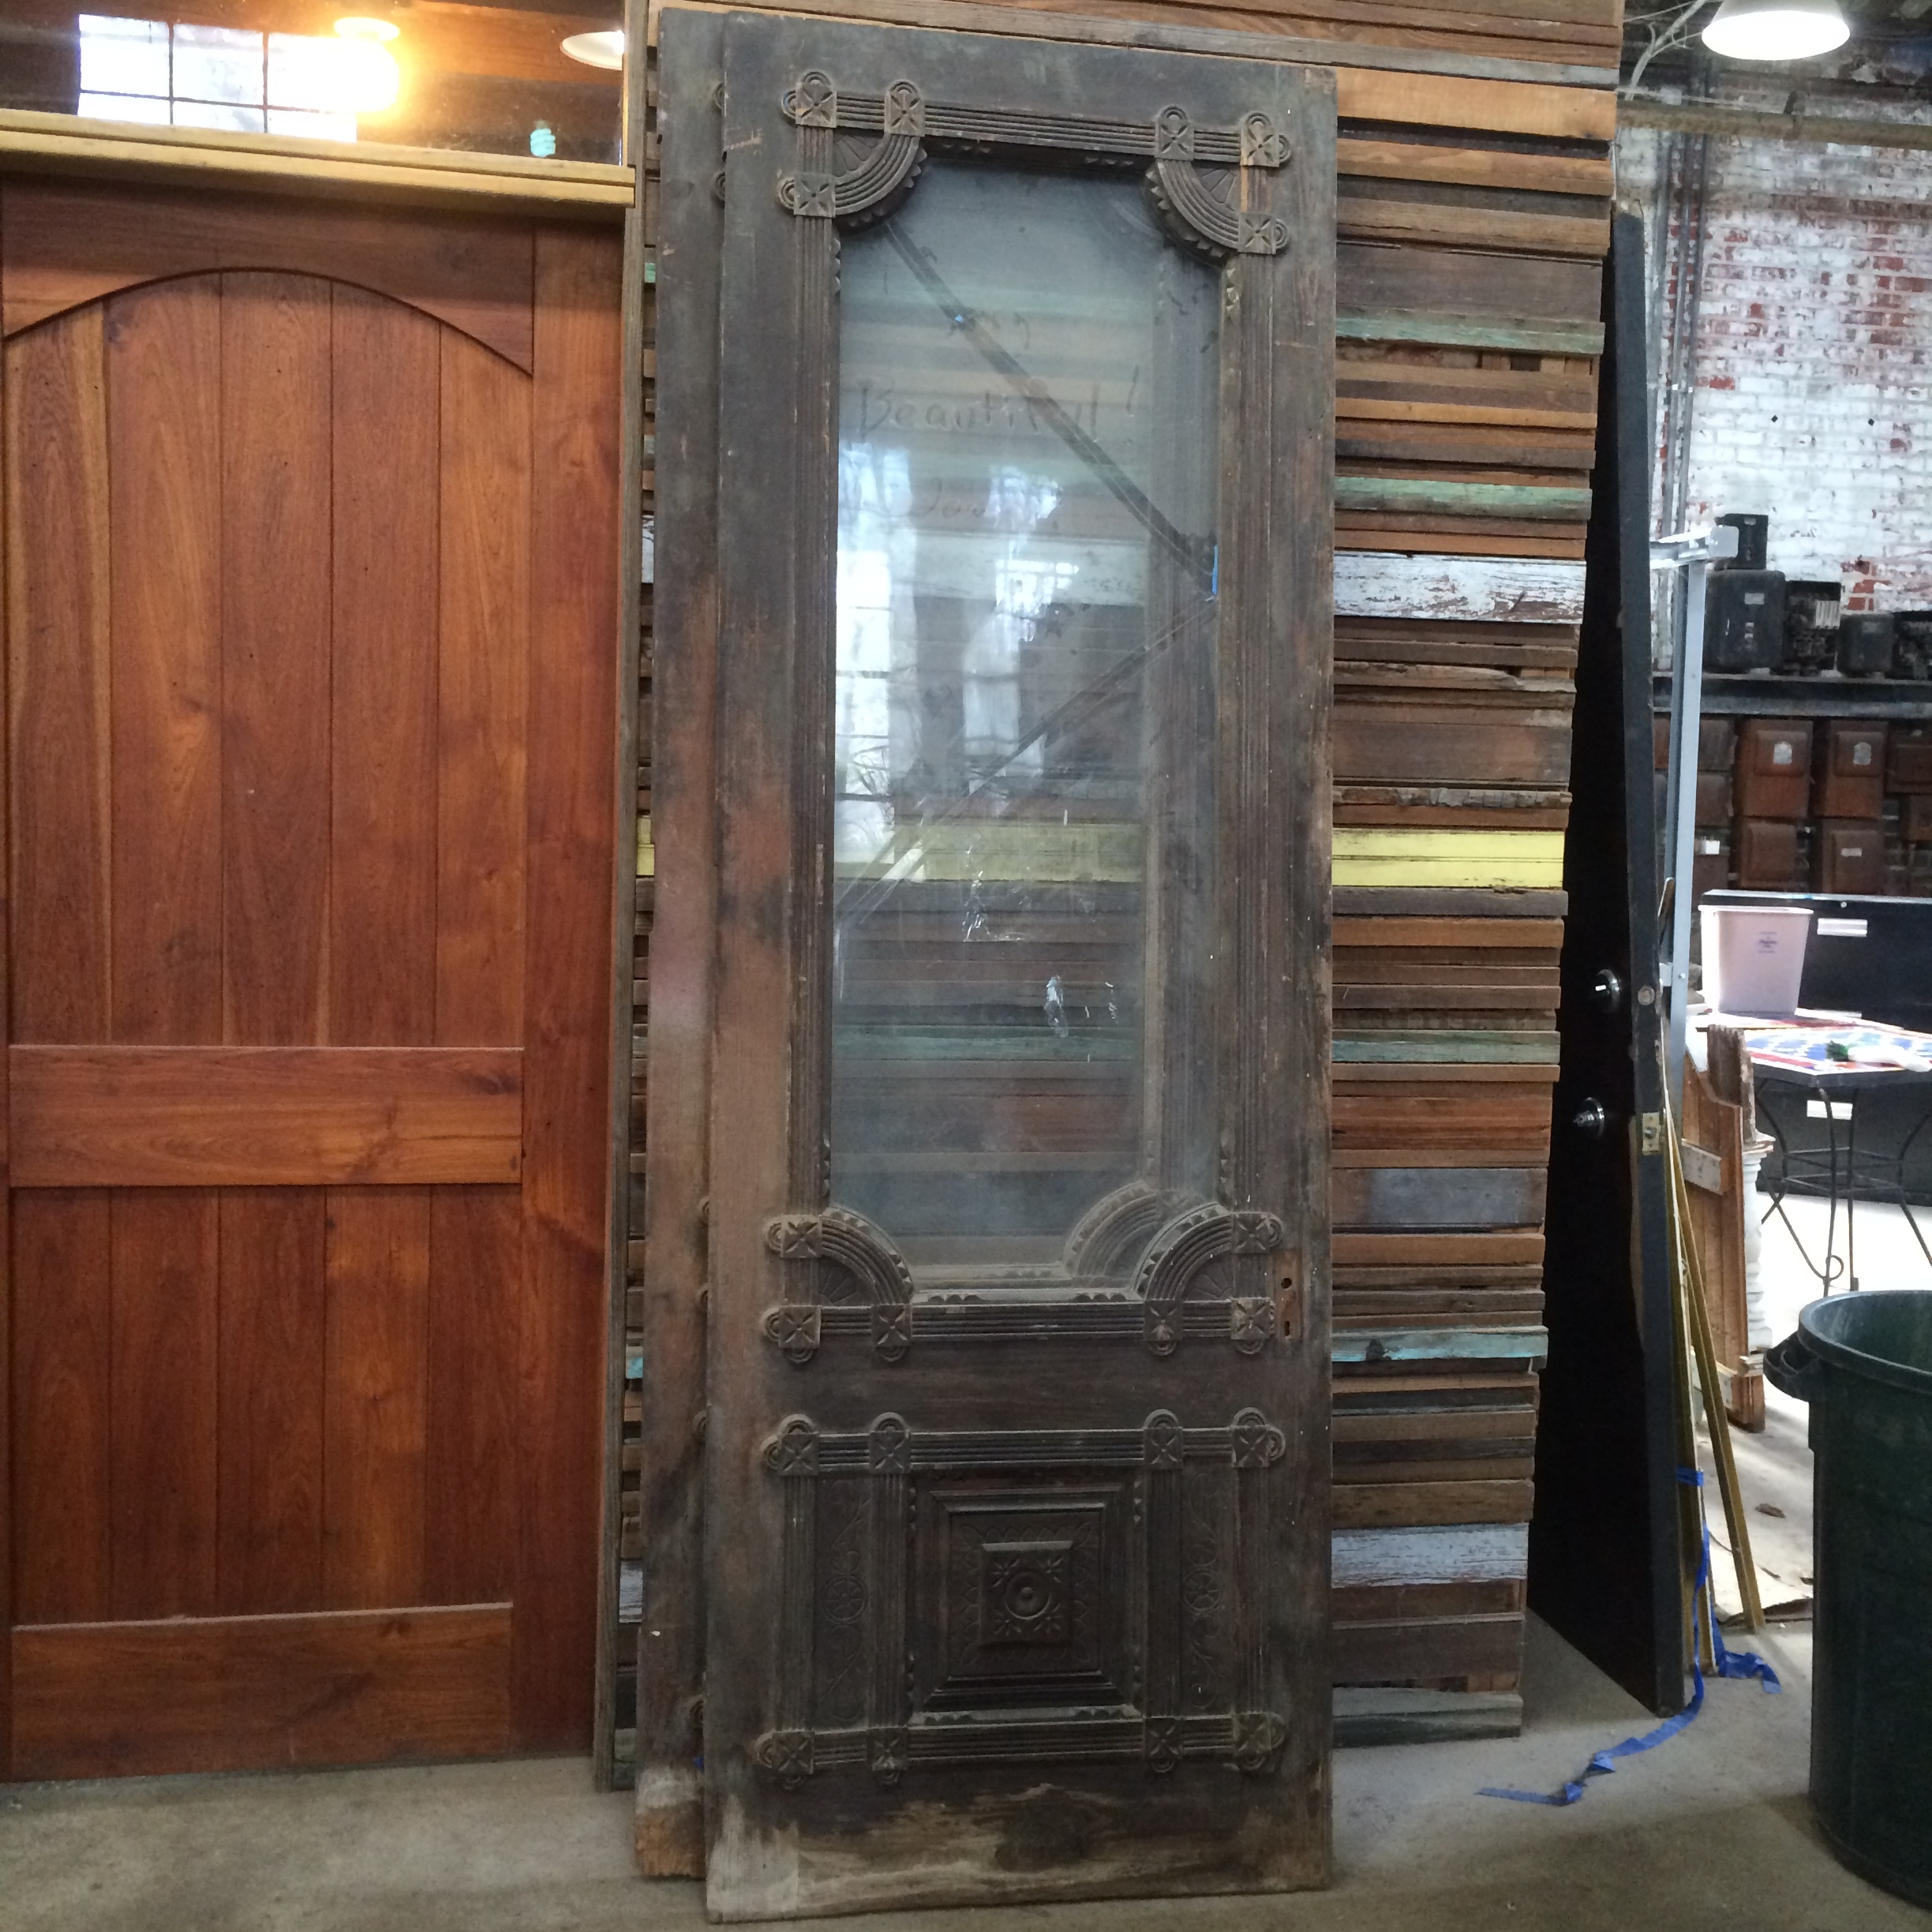 Antique Sale Eastlake Cottage Doors Ornate Newel Post Southern Pine Company,How To Price Garage Sale Items 2020